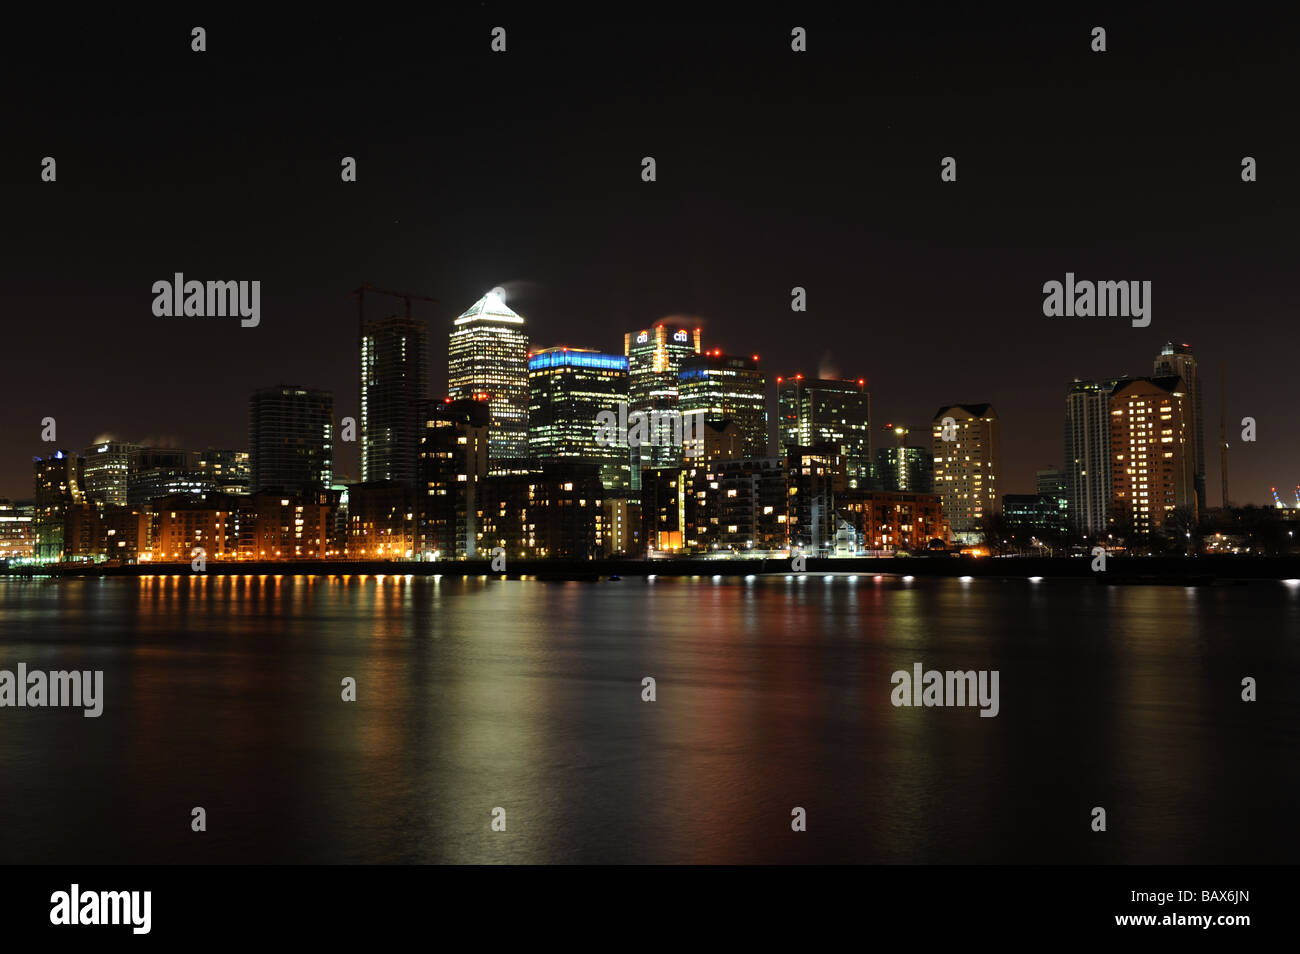 London's financial district including Canary Wharf, HSBC and Barclays taken at night. Stock Photo